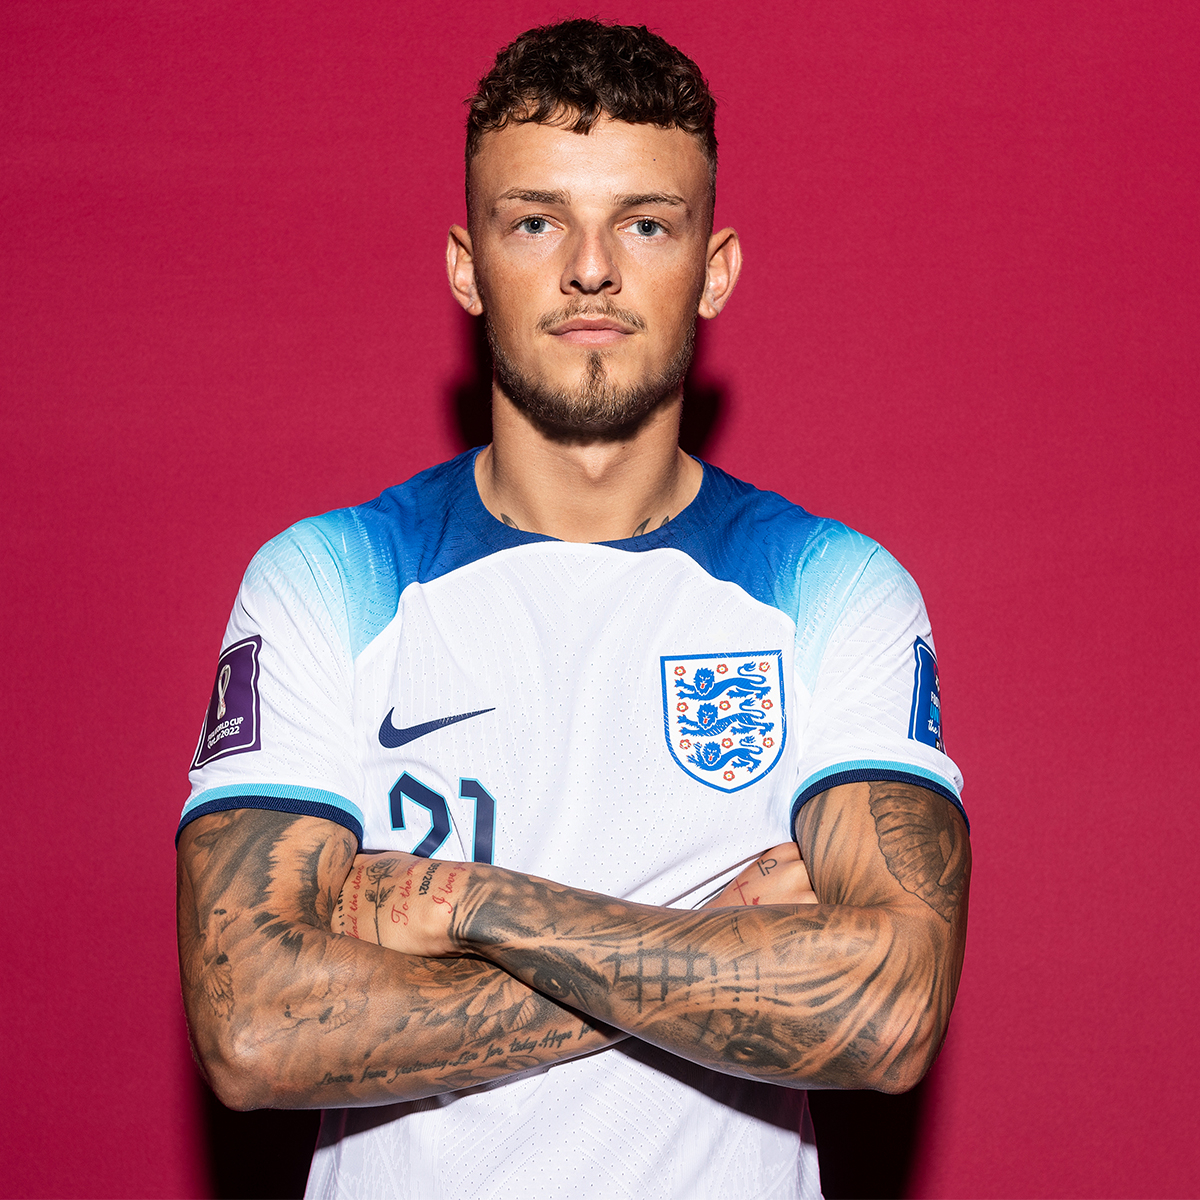 England Soccer Star Ben White Leaves 2022 World Cup for “Personal Reasons” – E! Online